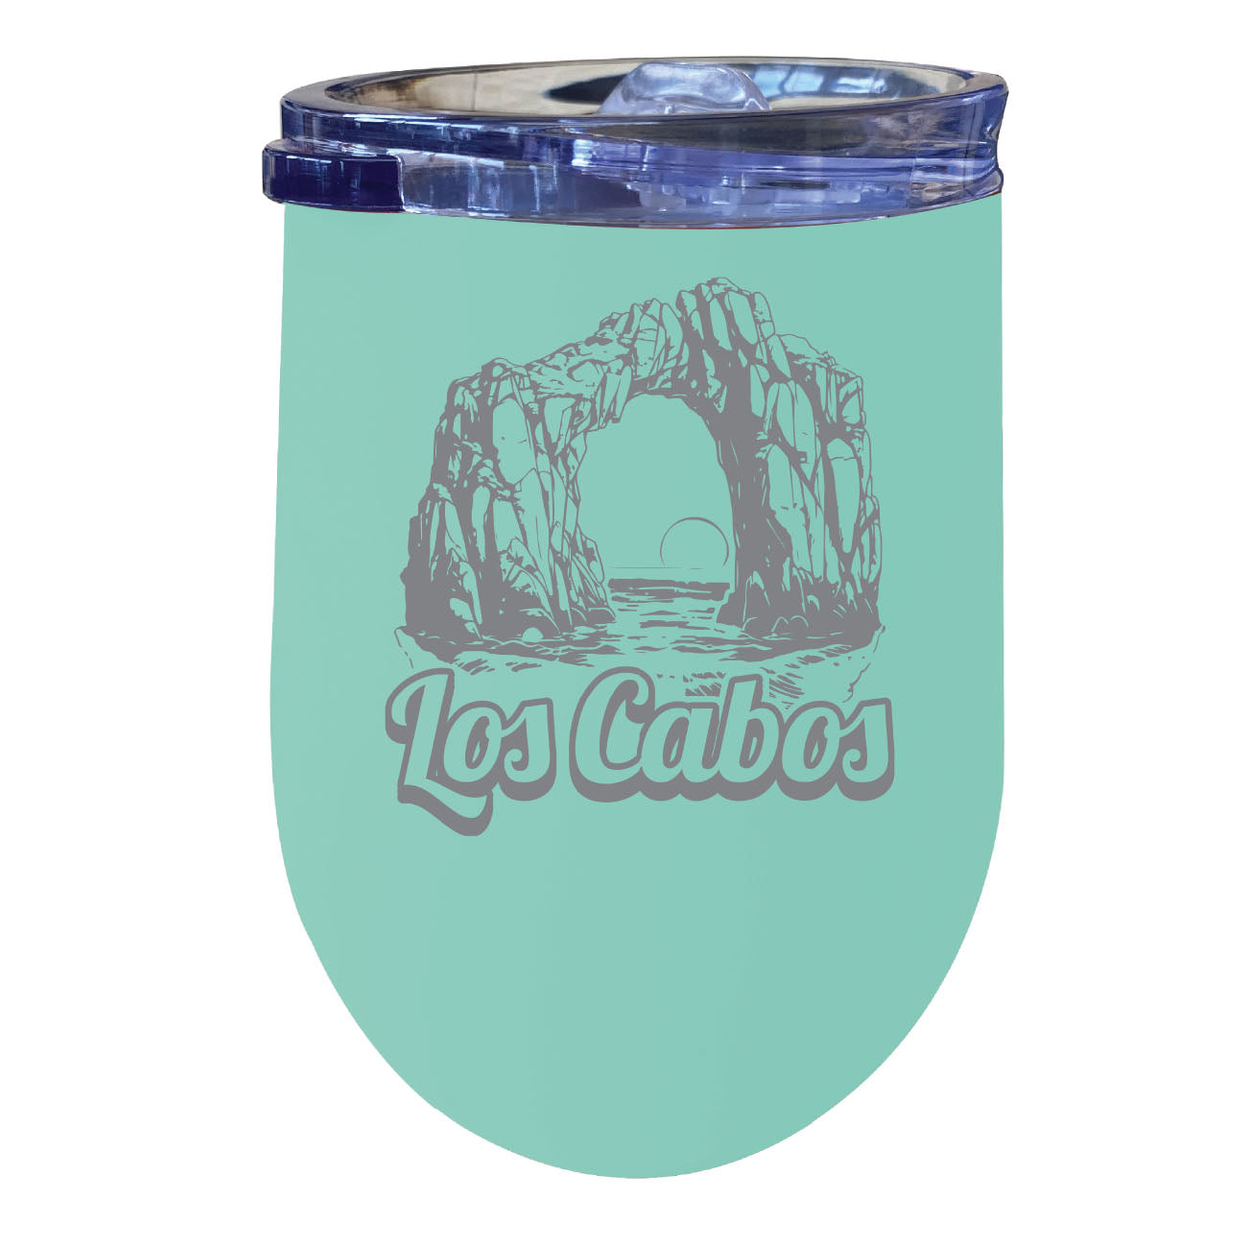 Los Cabos Mexico Souvenir 12 Oz Engraved Insulated Wine Stainless Steel Tumbler - Seafoam,,4-Pack